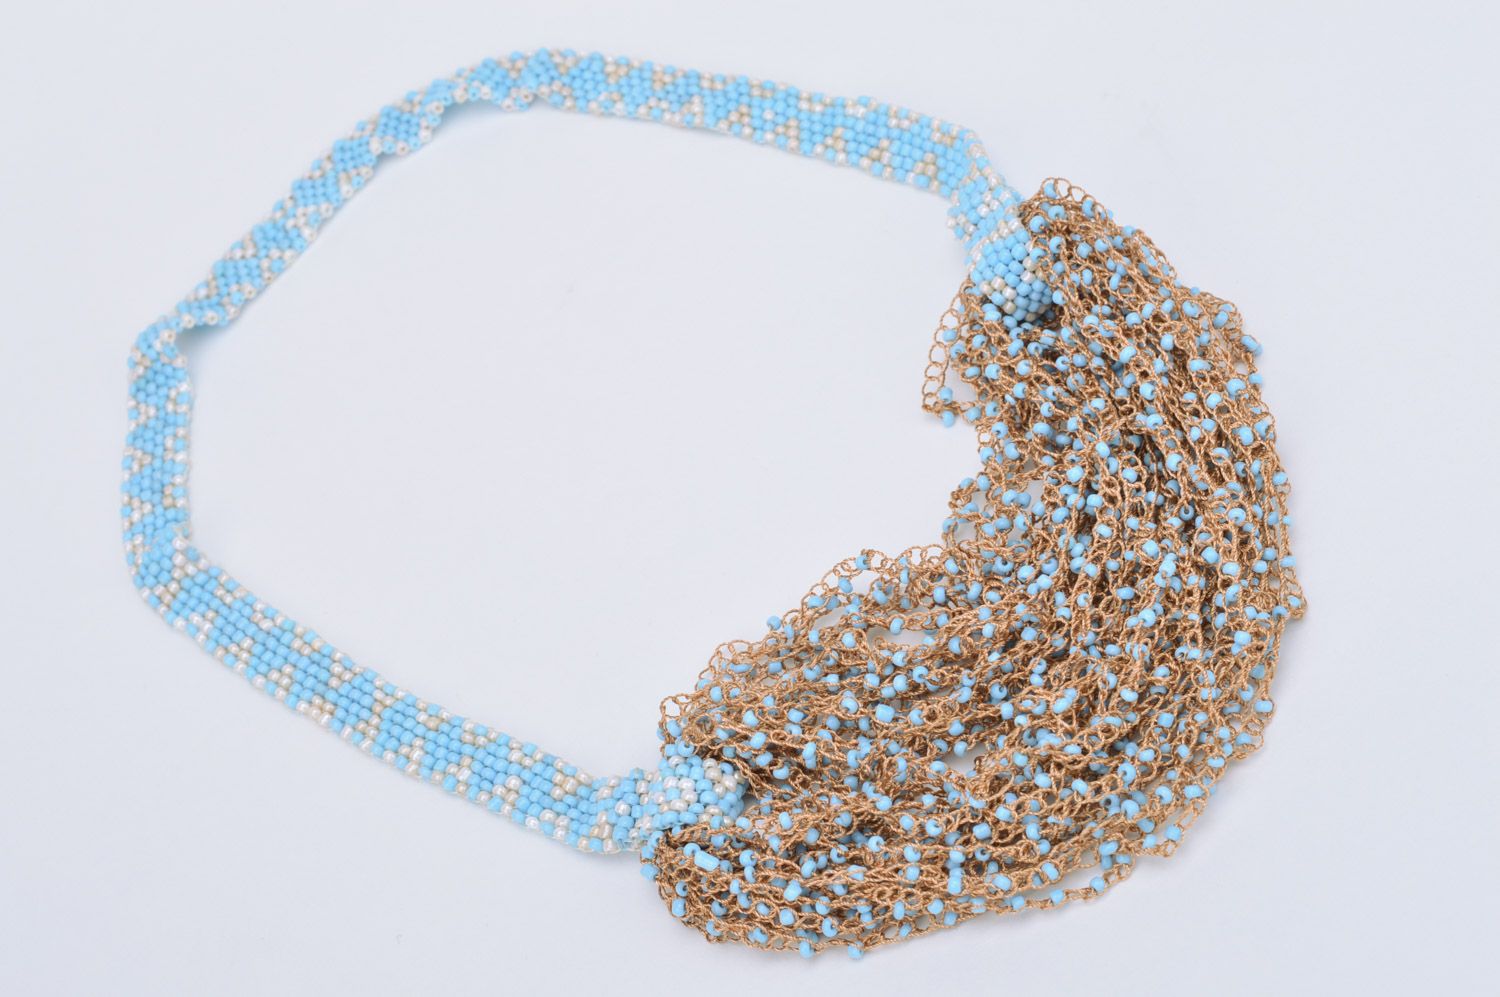 Handmade airy volume necklace woven of blue and brown beads and fishing line photo 2